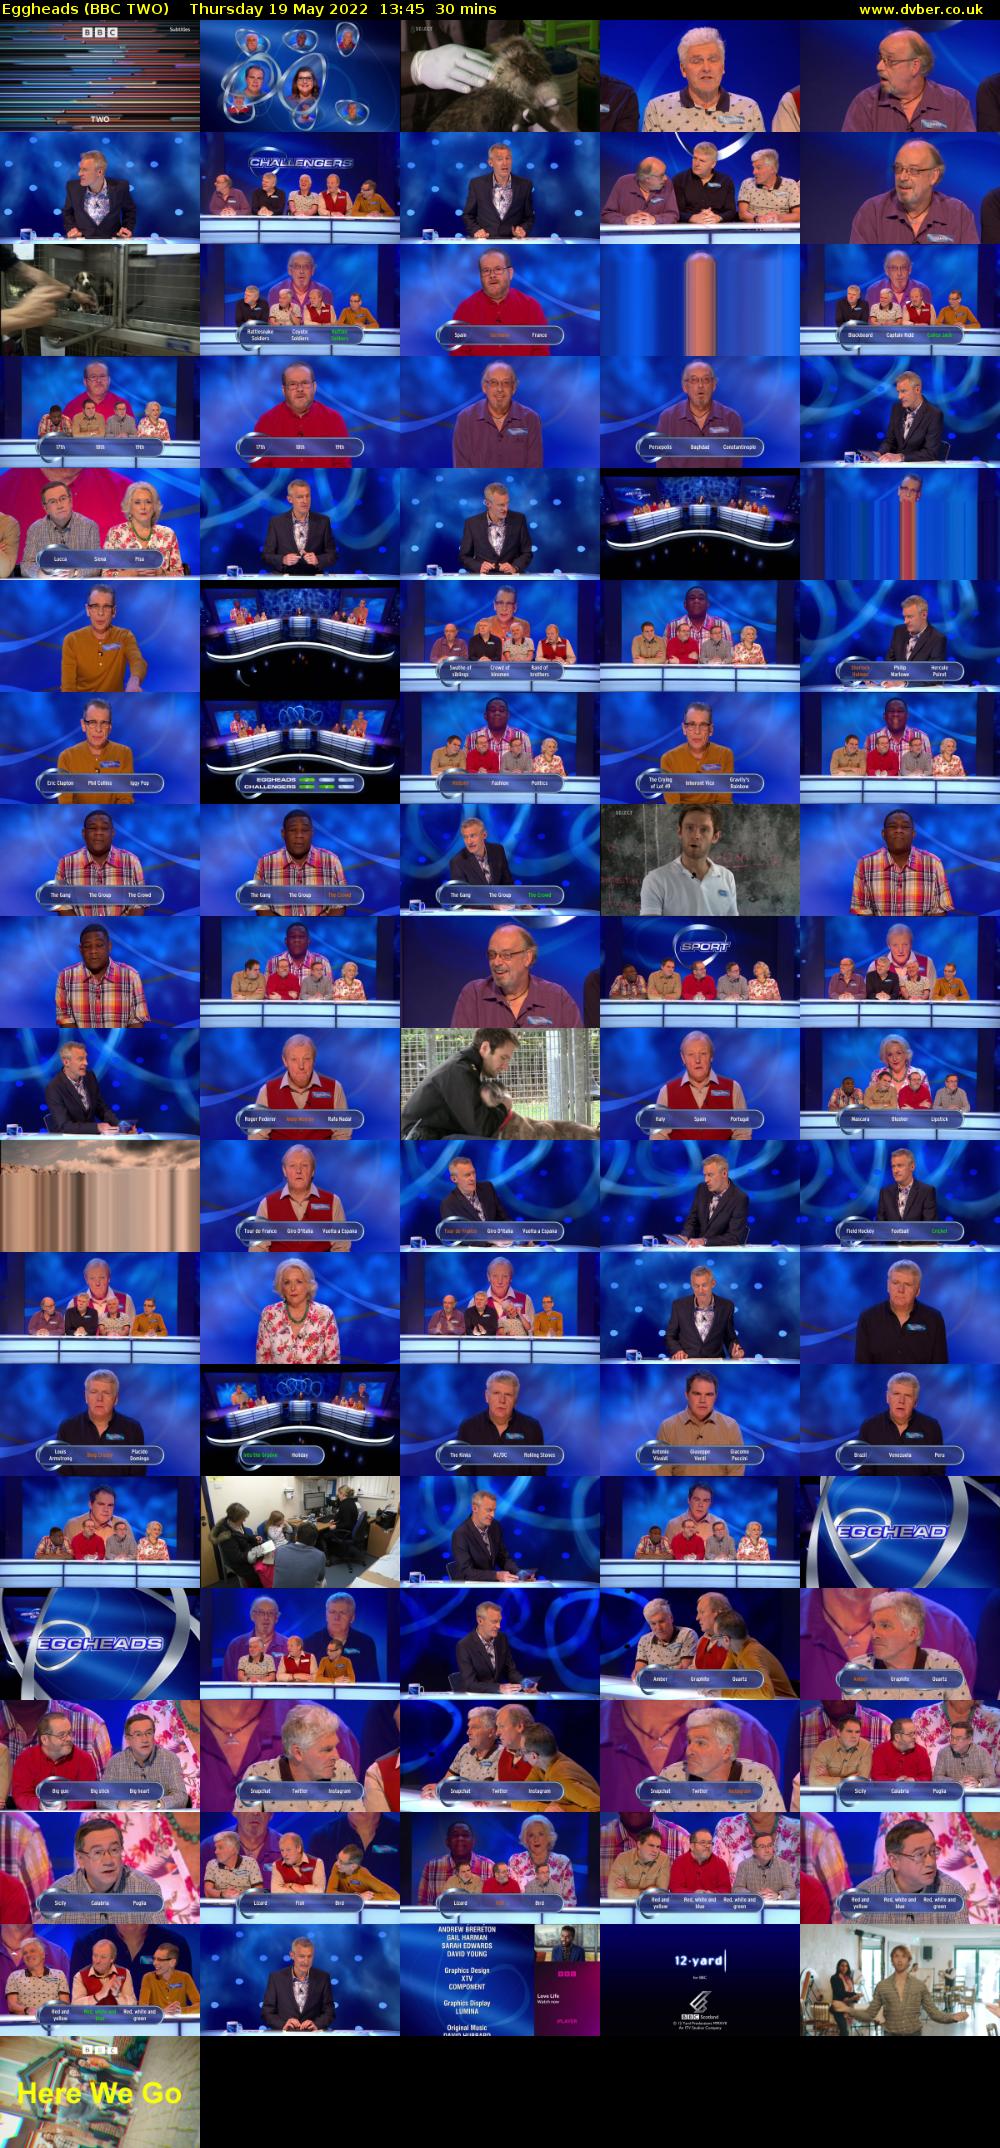 Eggheads (BBC TWO) Thursday 19 May 2022 13:45 - 14:15